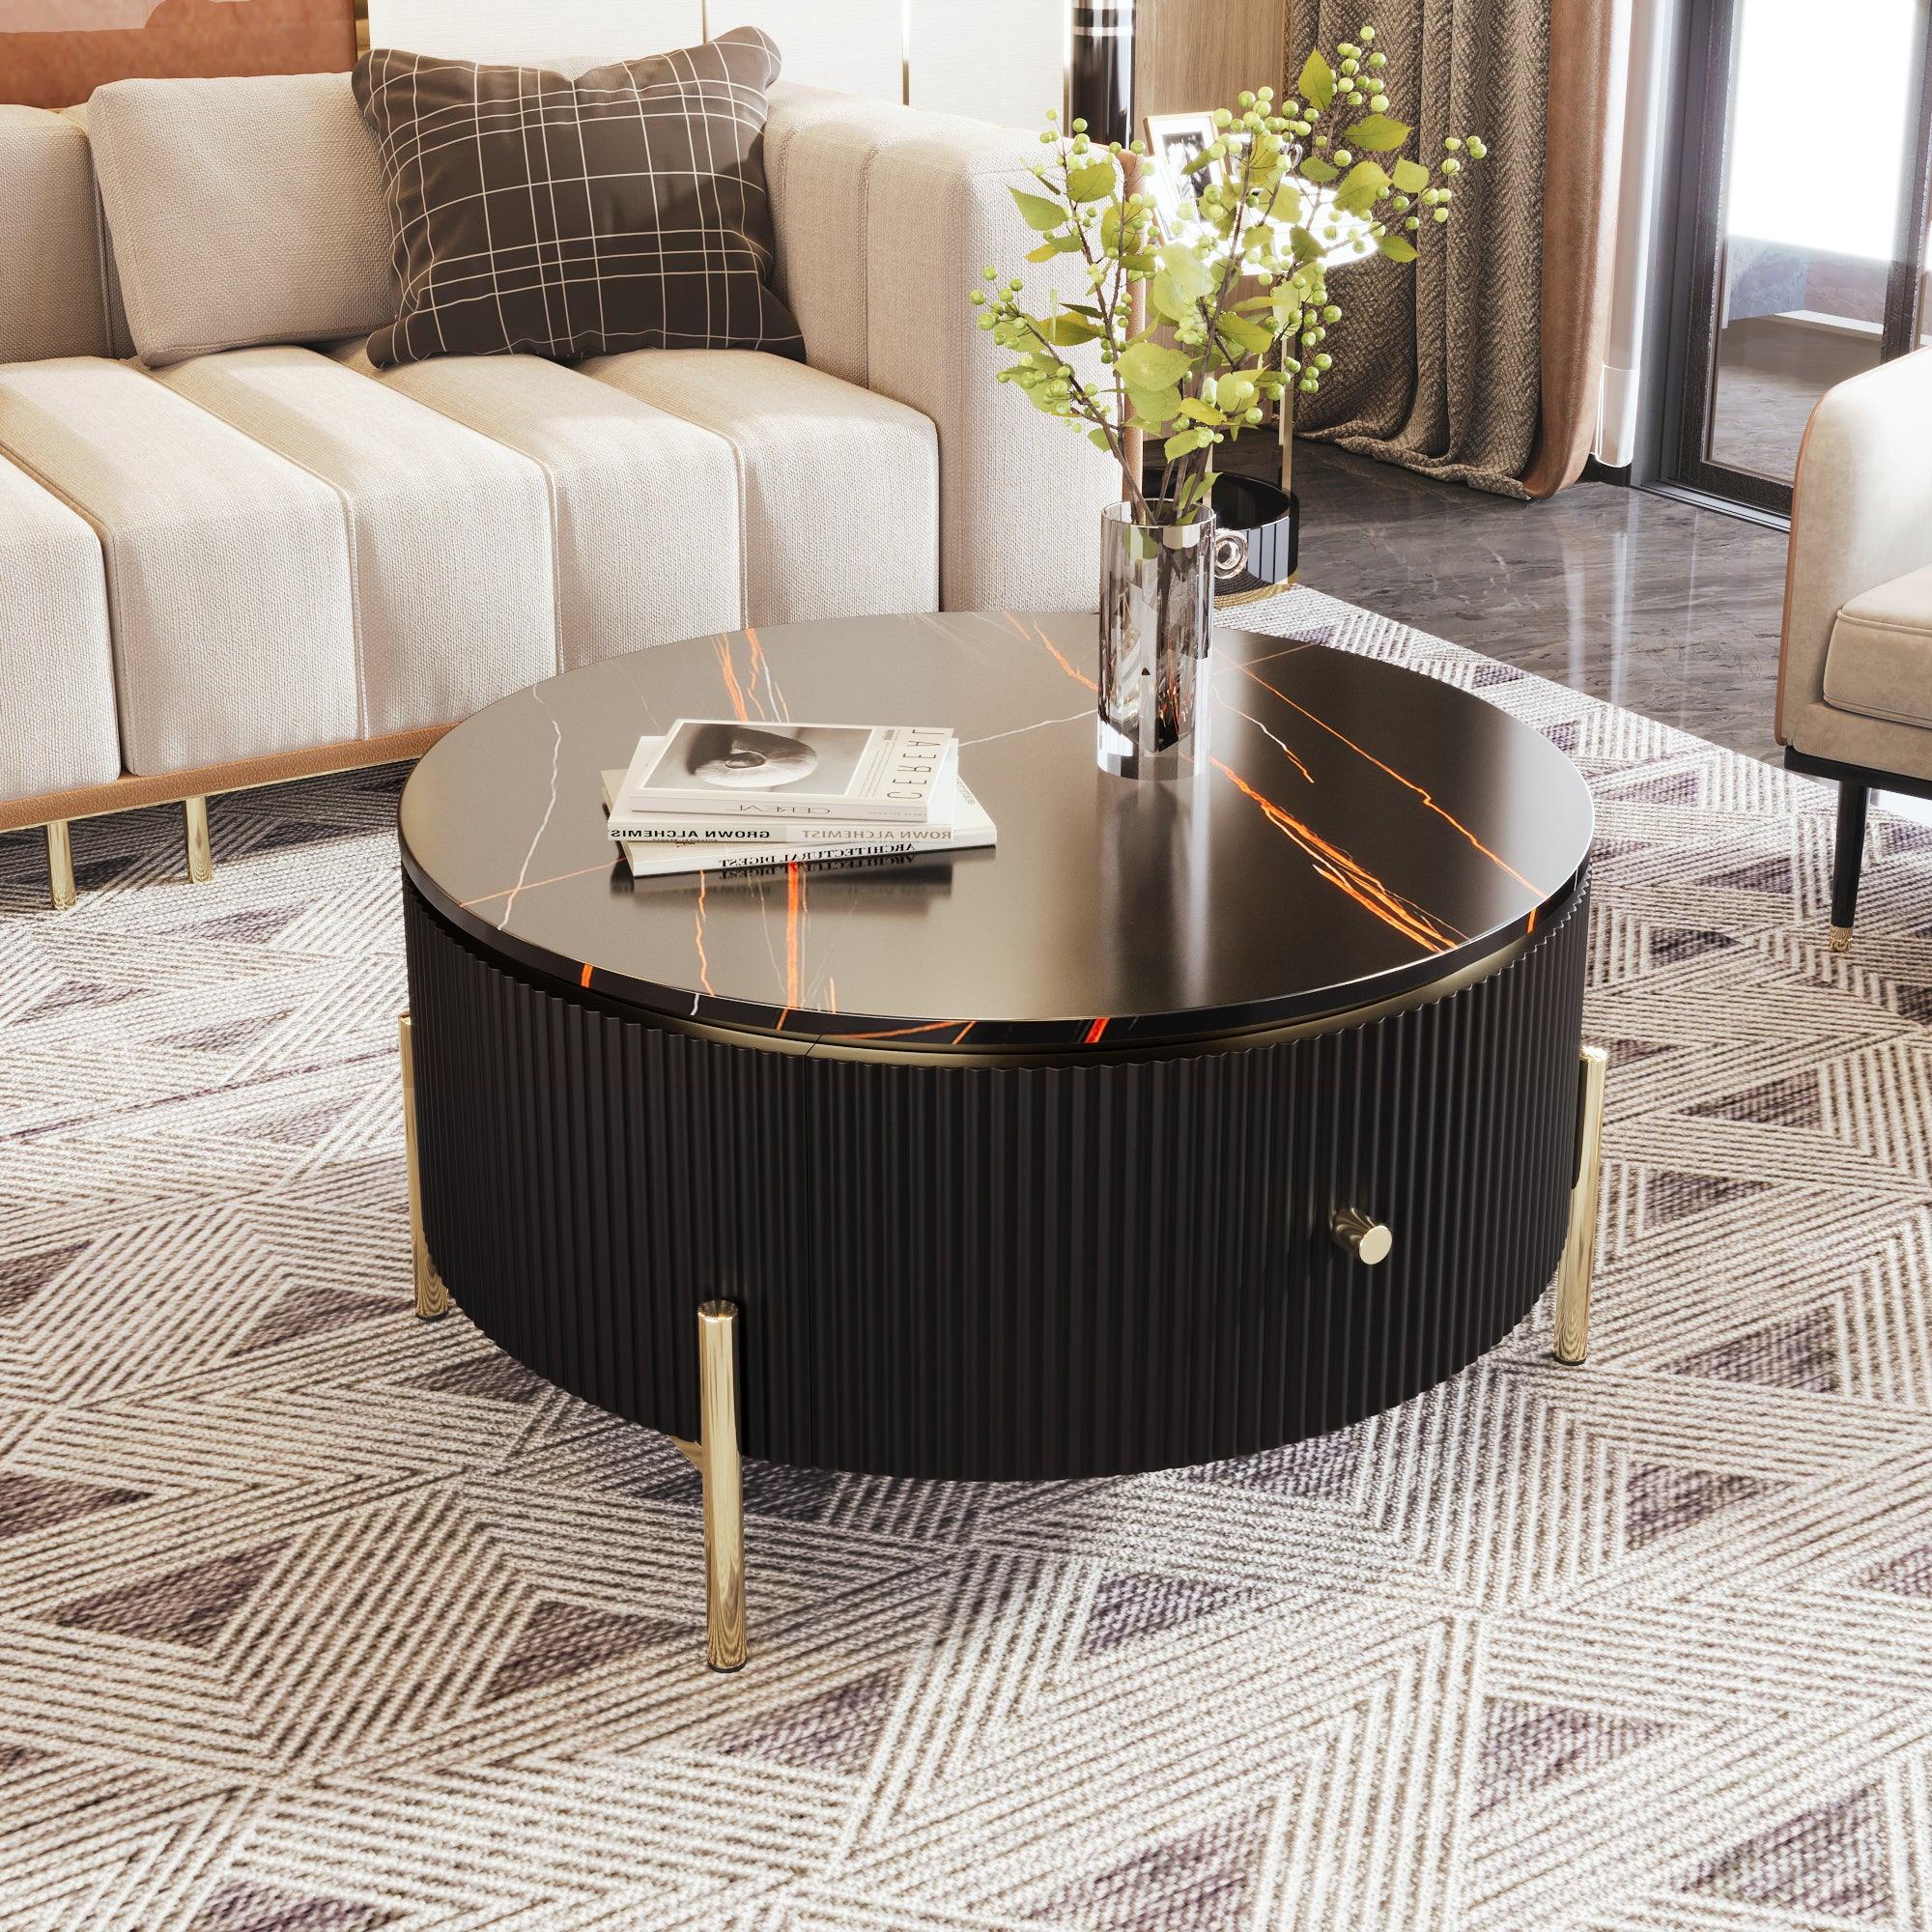 🆓🚛 Jamefer Modern Round Coffee Table With 2 Large Drawers - Black